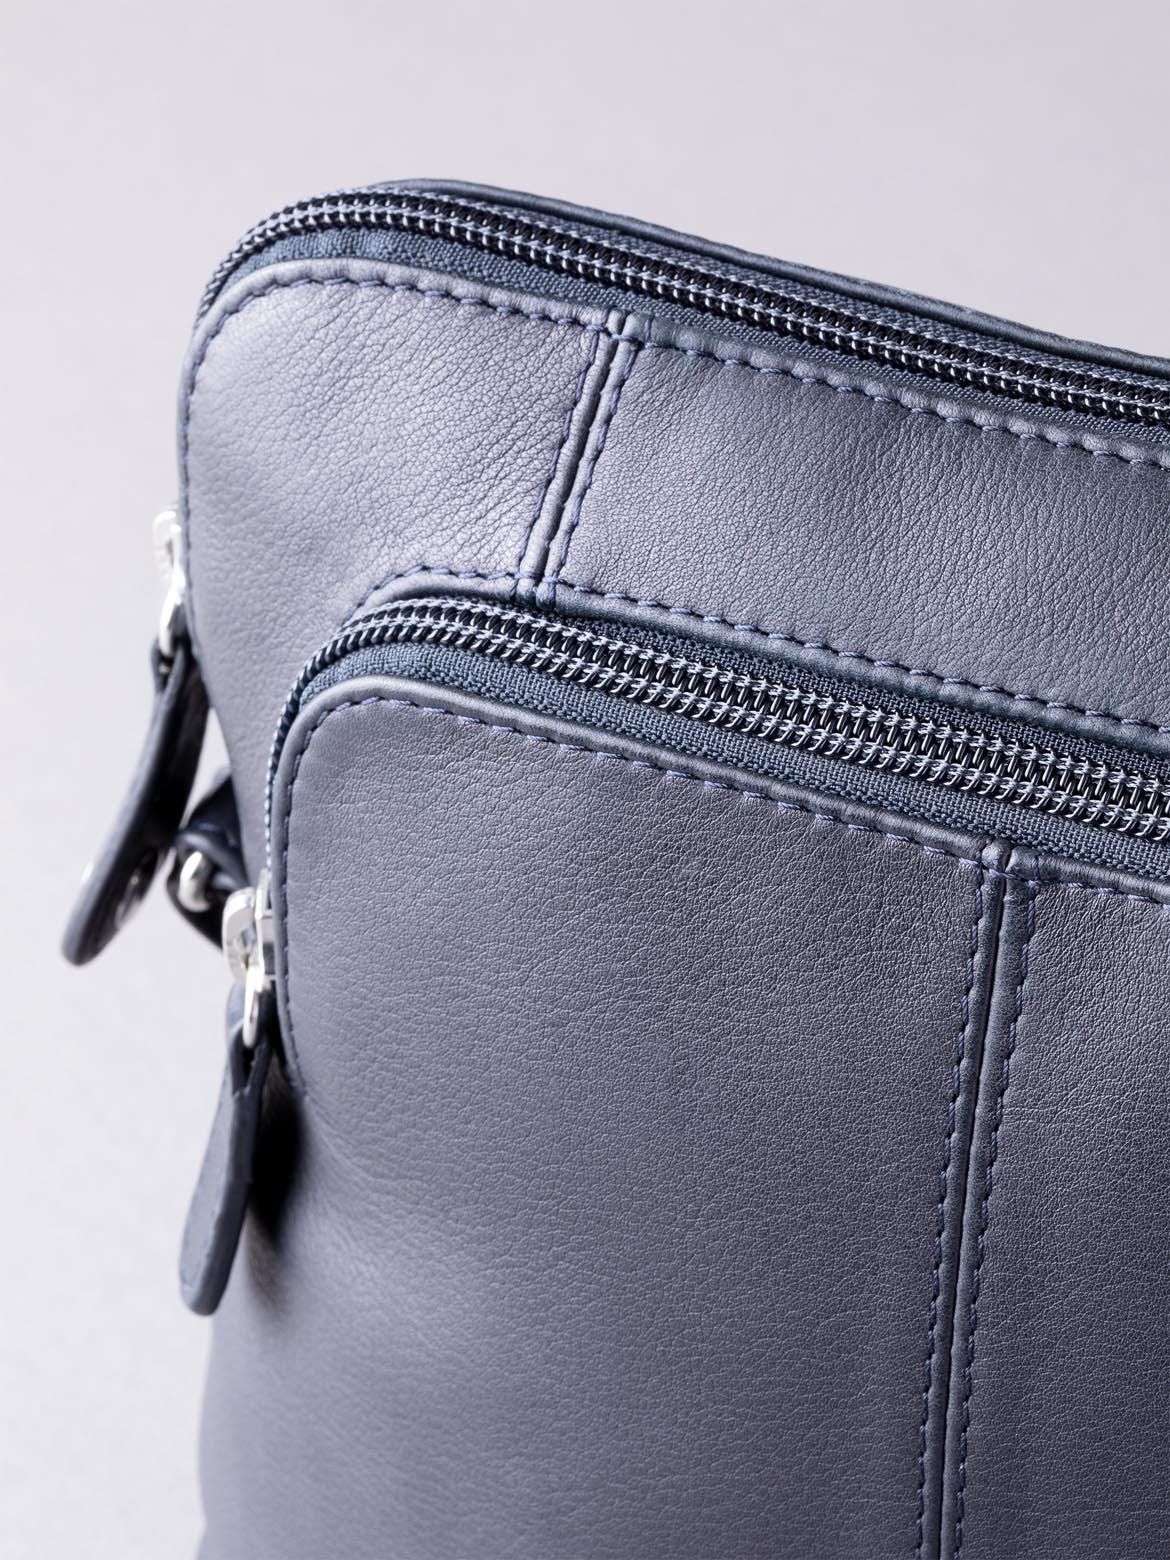 You can't argue the Raven Leather Cross Body Bag in Navy is an all-weather, all-season cross body bag. Substitute your usual handbag for this charming and functional new season update, the Raven Cross Body in Navy. Crafted using real soft quality leather, the Rachel is complete with silver tonal hardware and an adjustable strap for easy wear and styling. A versatile bag that is ideal for everyone and every day use.